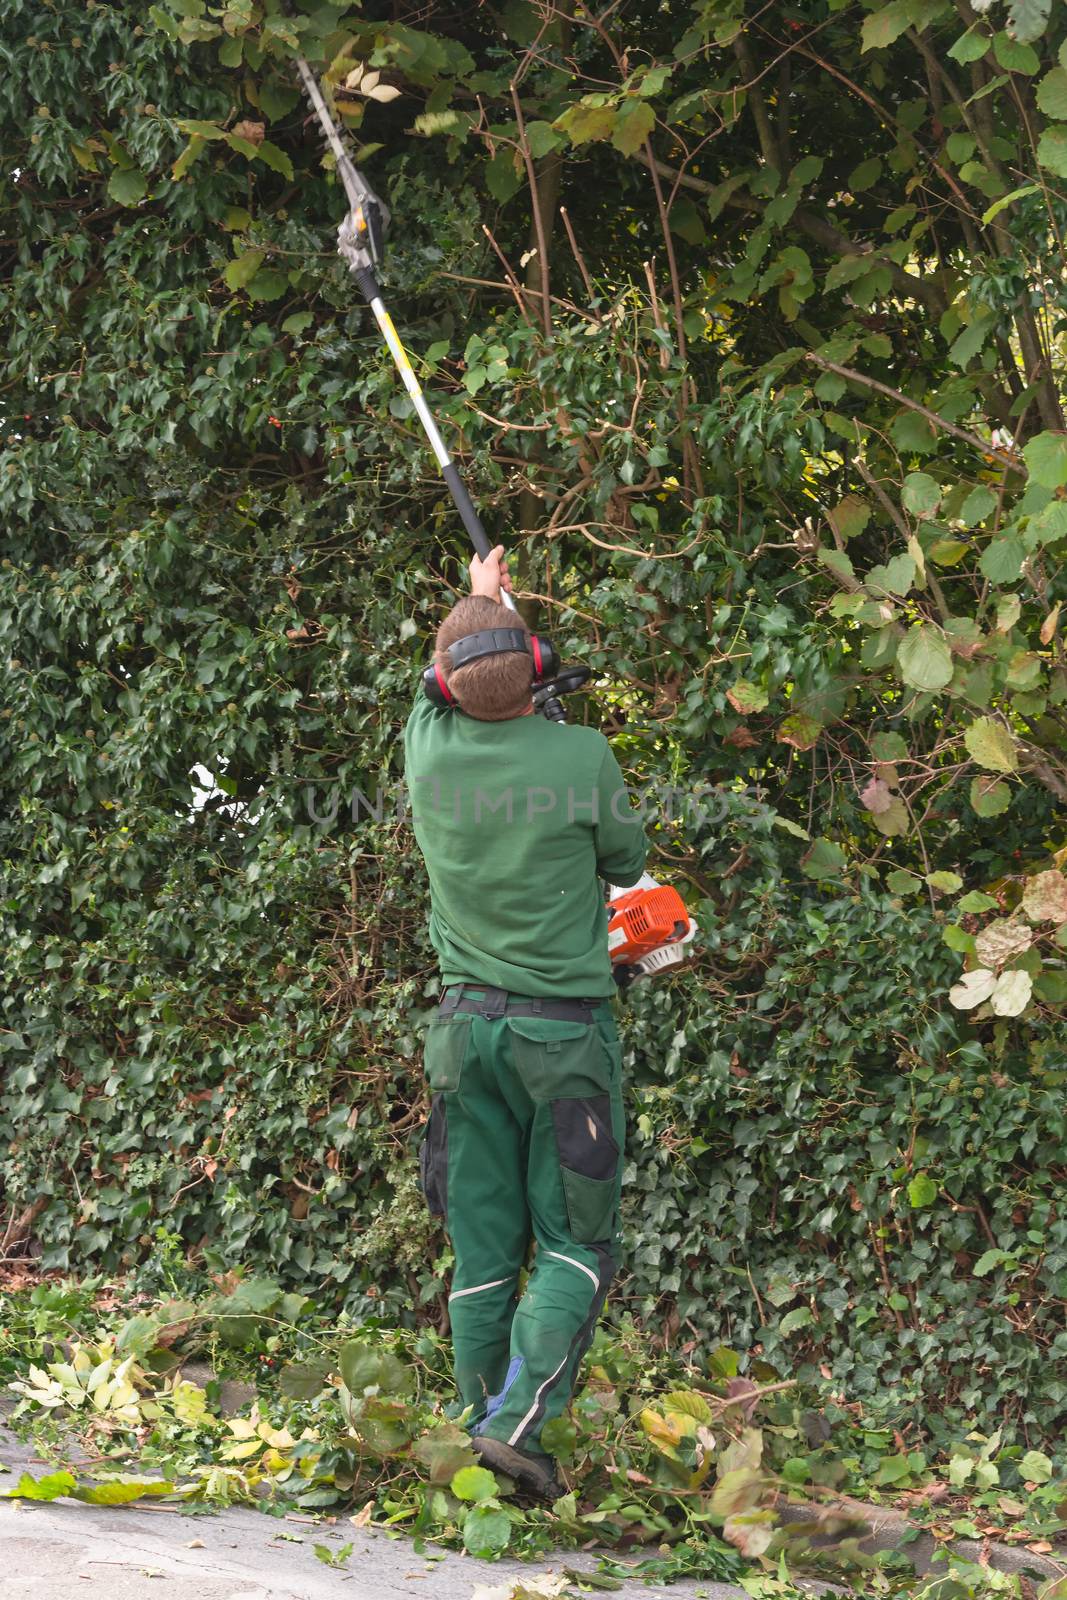 Panoramic image from cutting a hedge with a hedge trimmer motor.